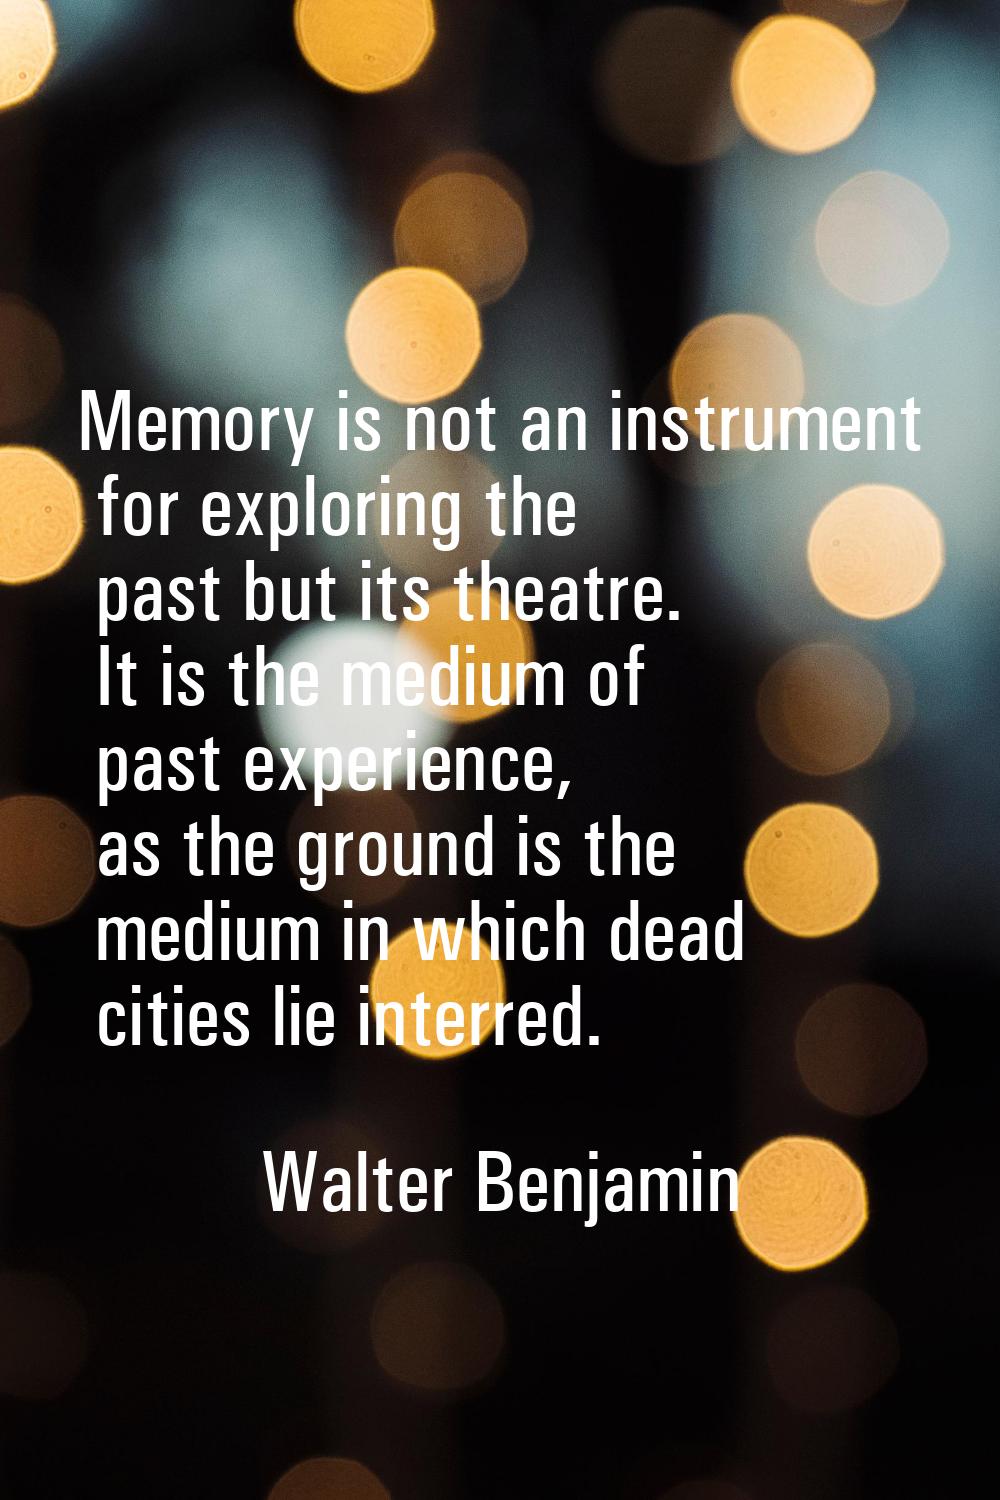 Memory is not an instrument for exploring the past but its theatre. It is the medium of past experi